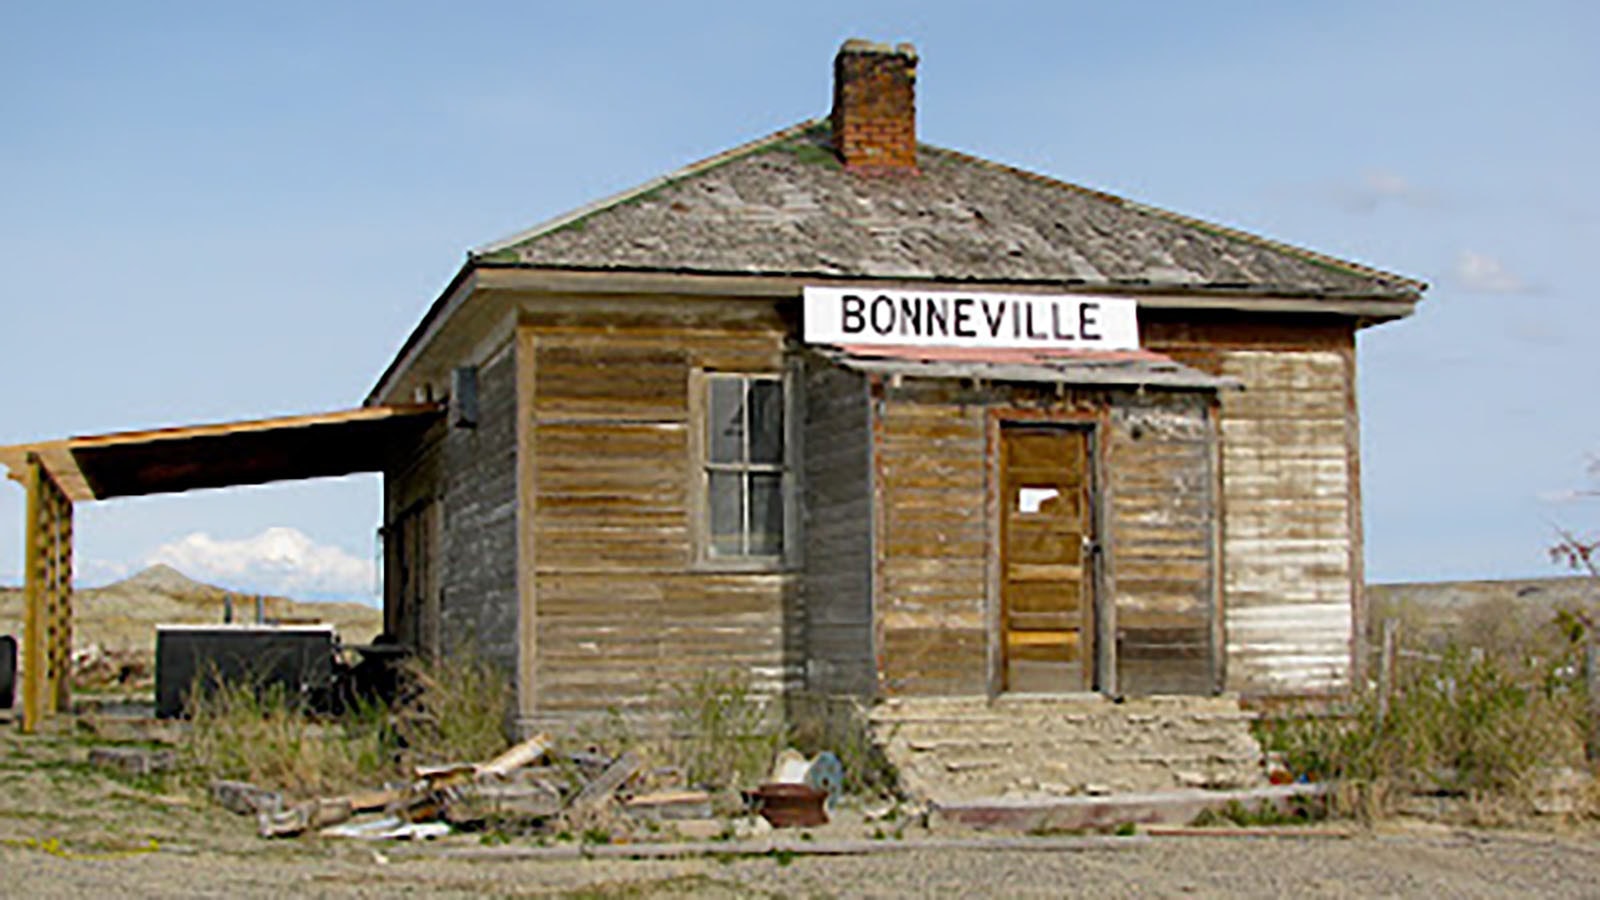 The town of Bonneville, Wyoming, was rocked in 1921 when a truck hauling nitroglycerine exploded, blowing its driver and a hitchhiker to bits and sending shrapnel around the town.